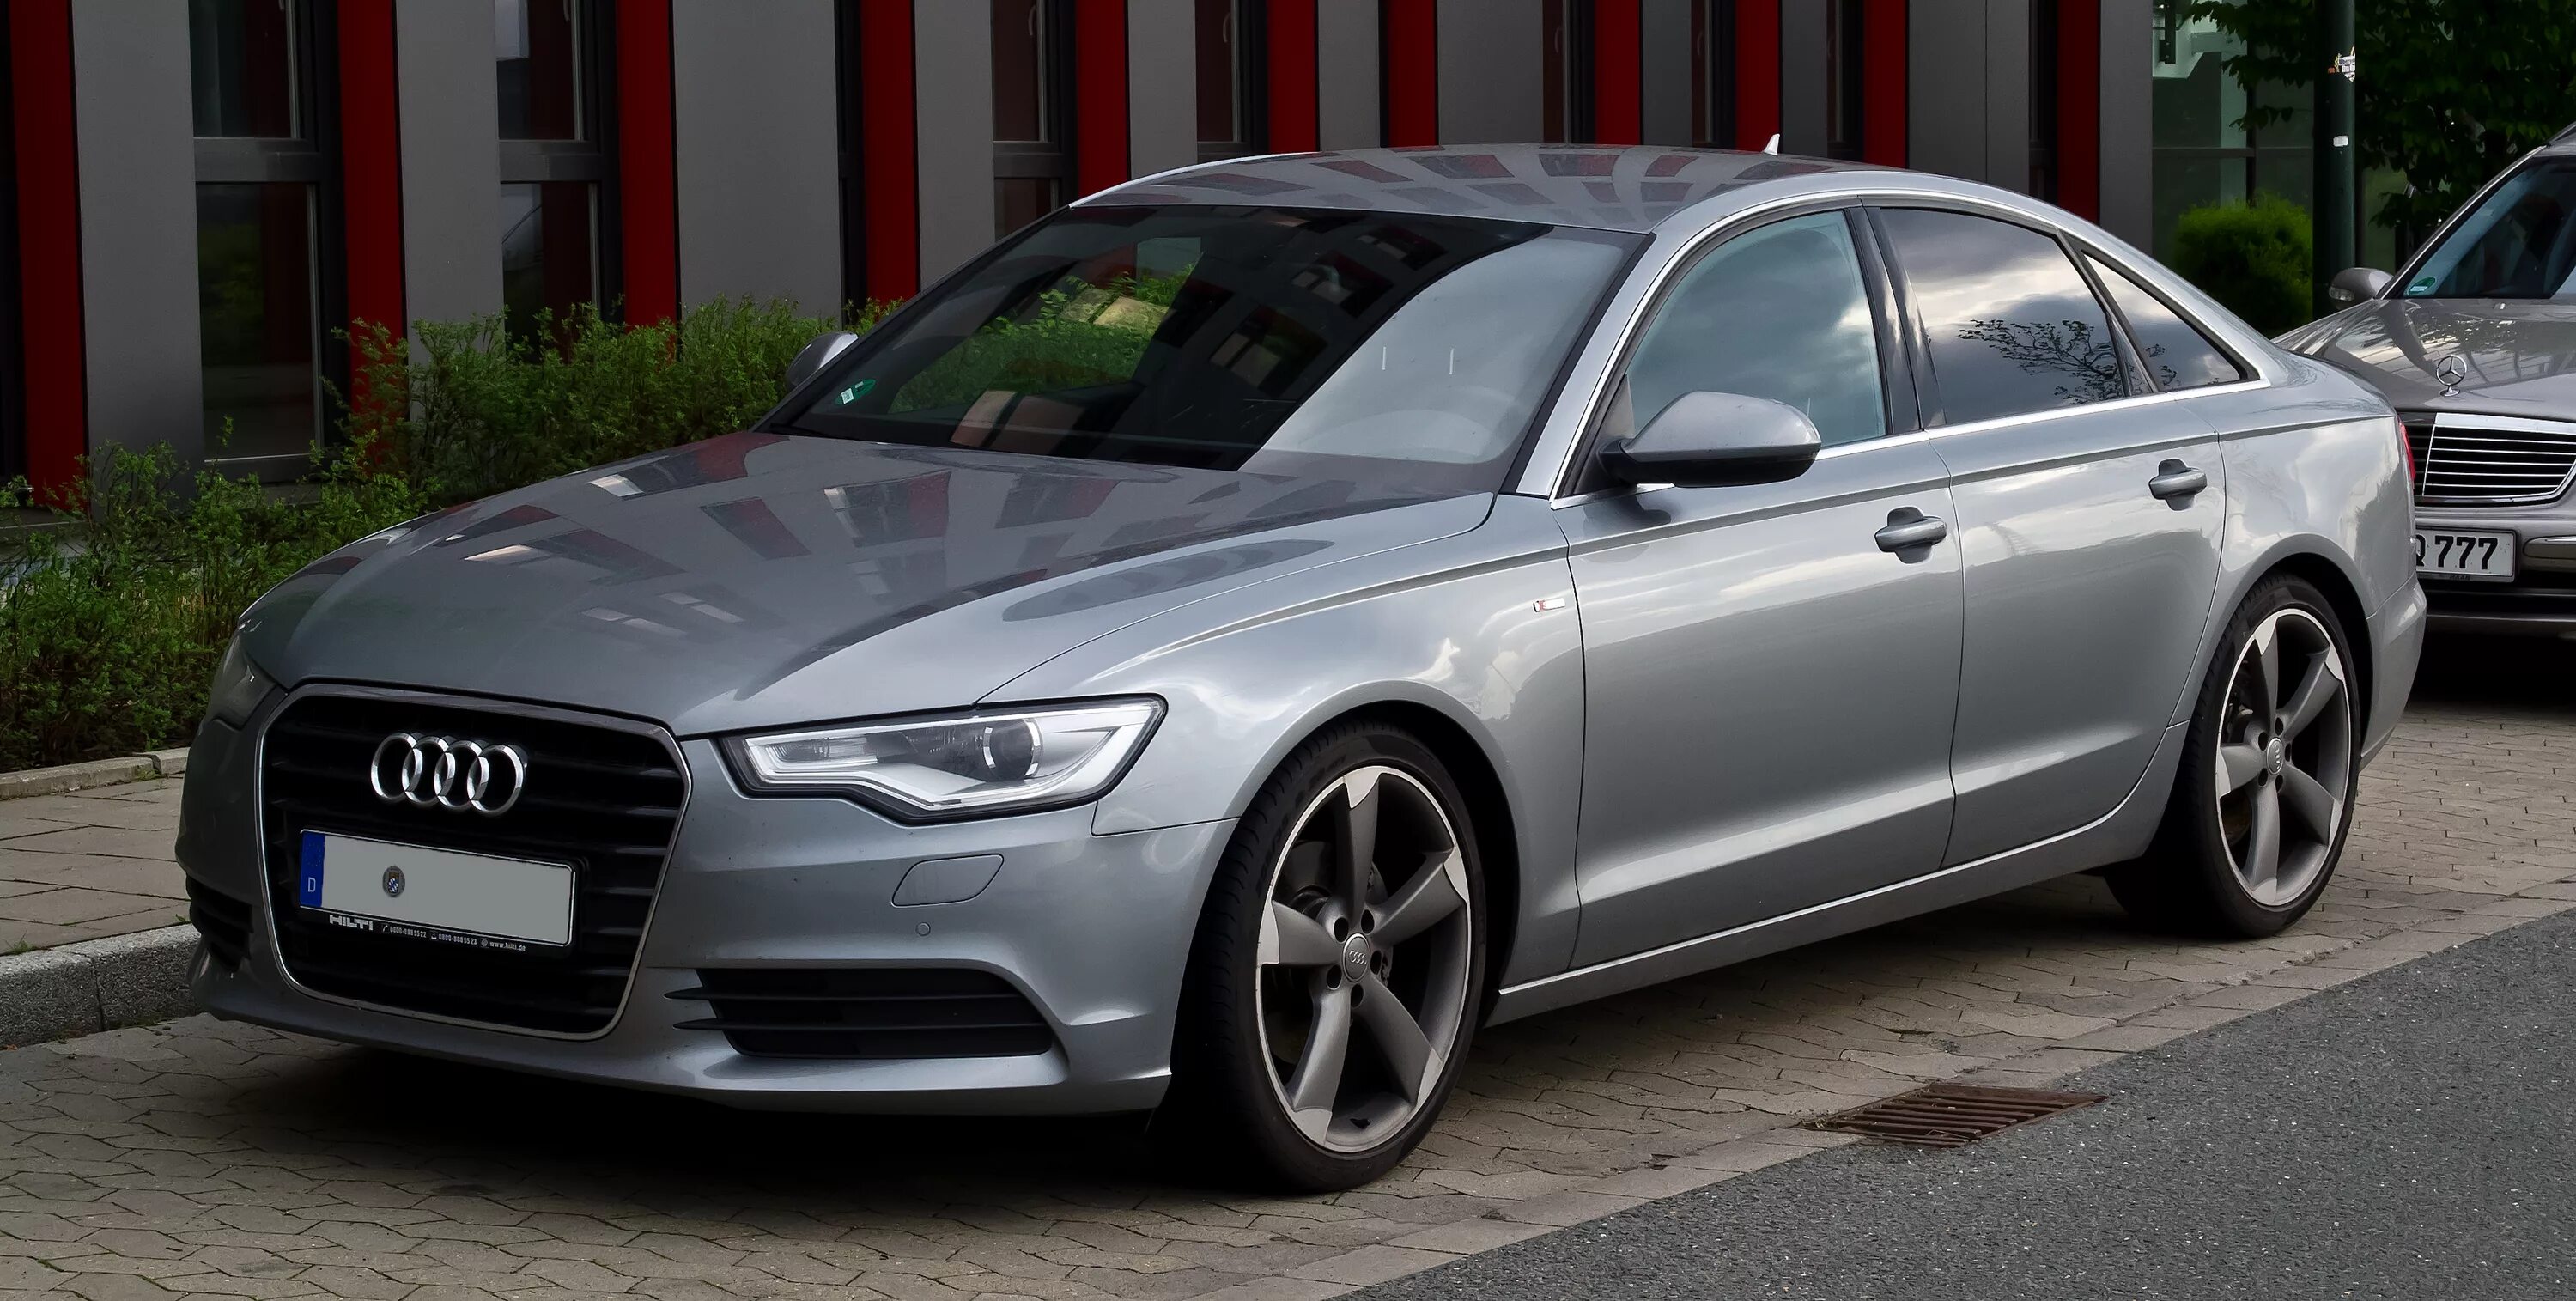 Ауди а6 с 7. Audi a6 c7. Audi a6 c7 2011. Audi a6 c7 2012. Audi a6 c7 Restyling.